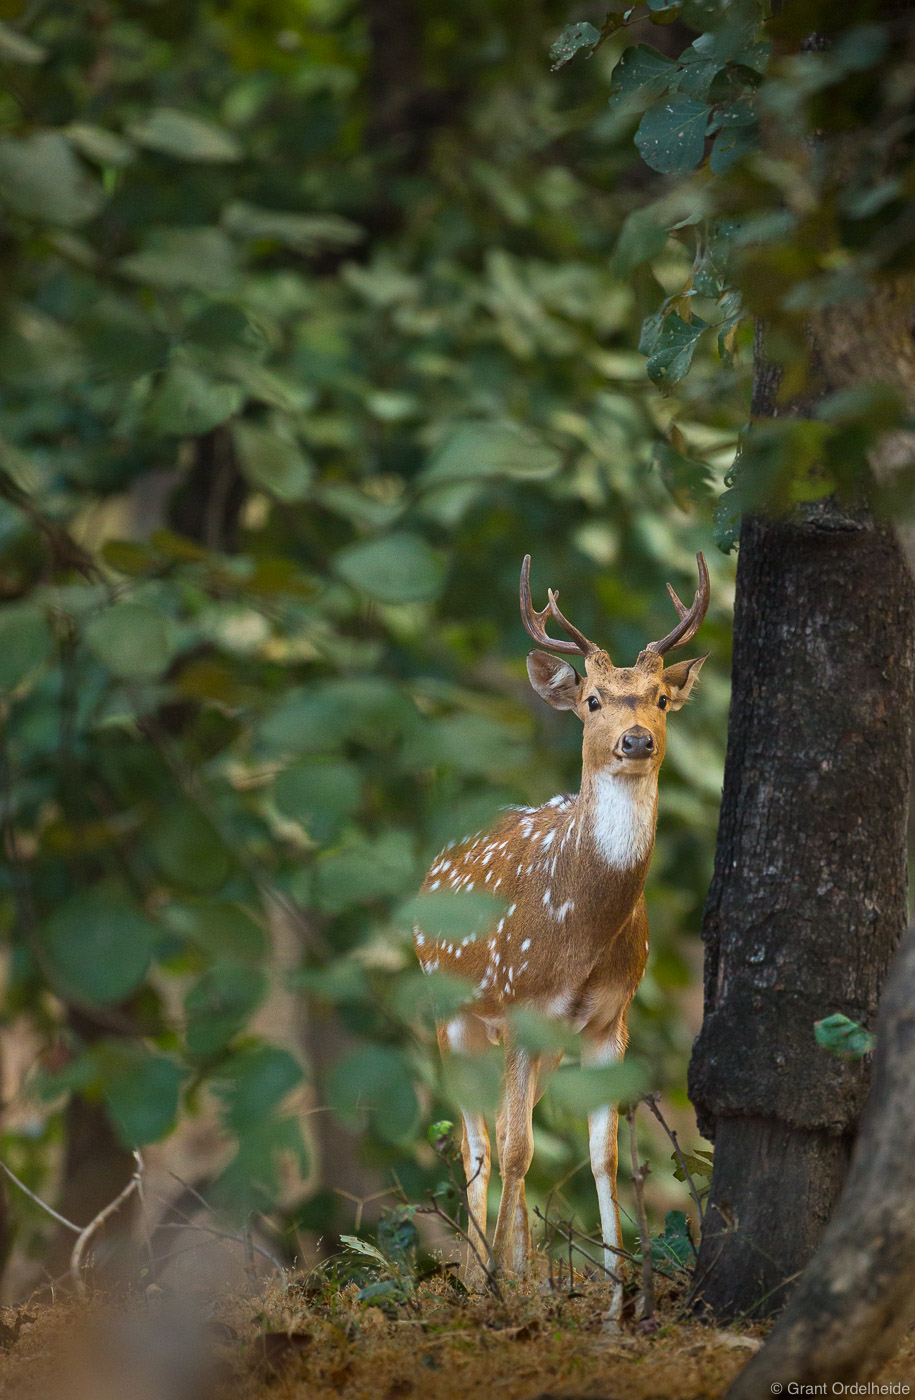 A Spotted Deer among the trees in Bandhavgarh National Park.